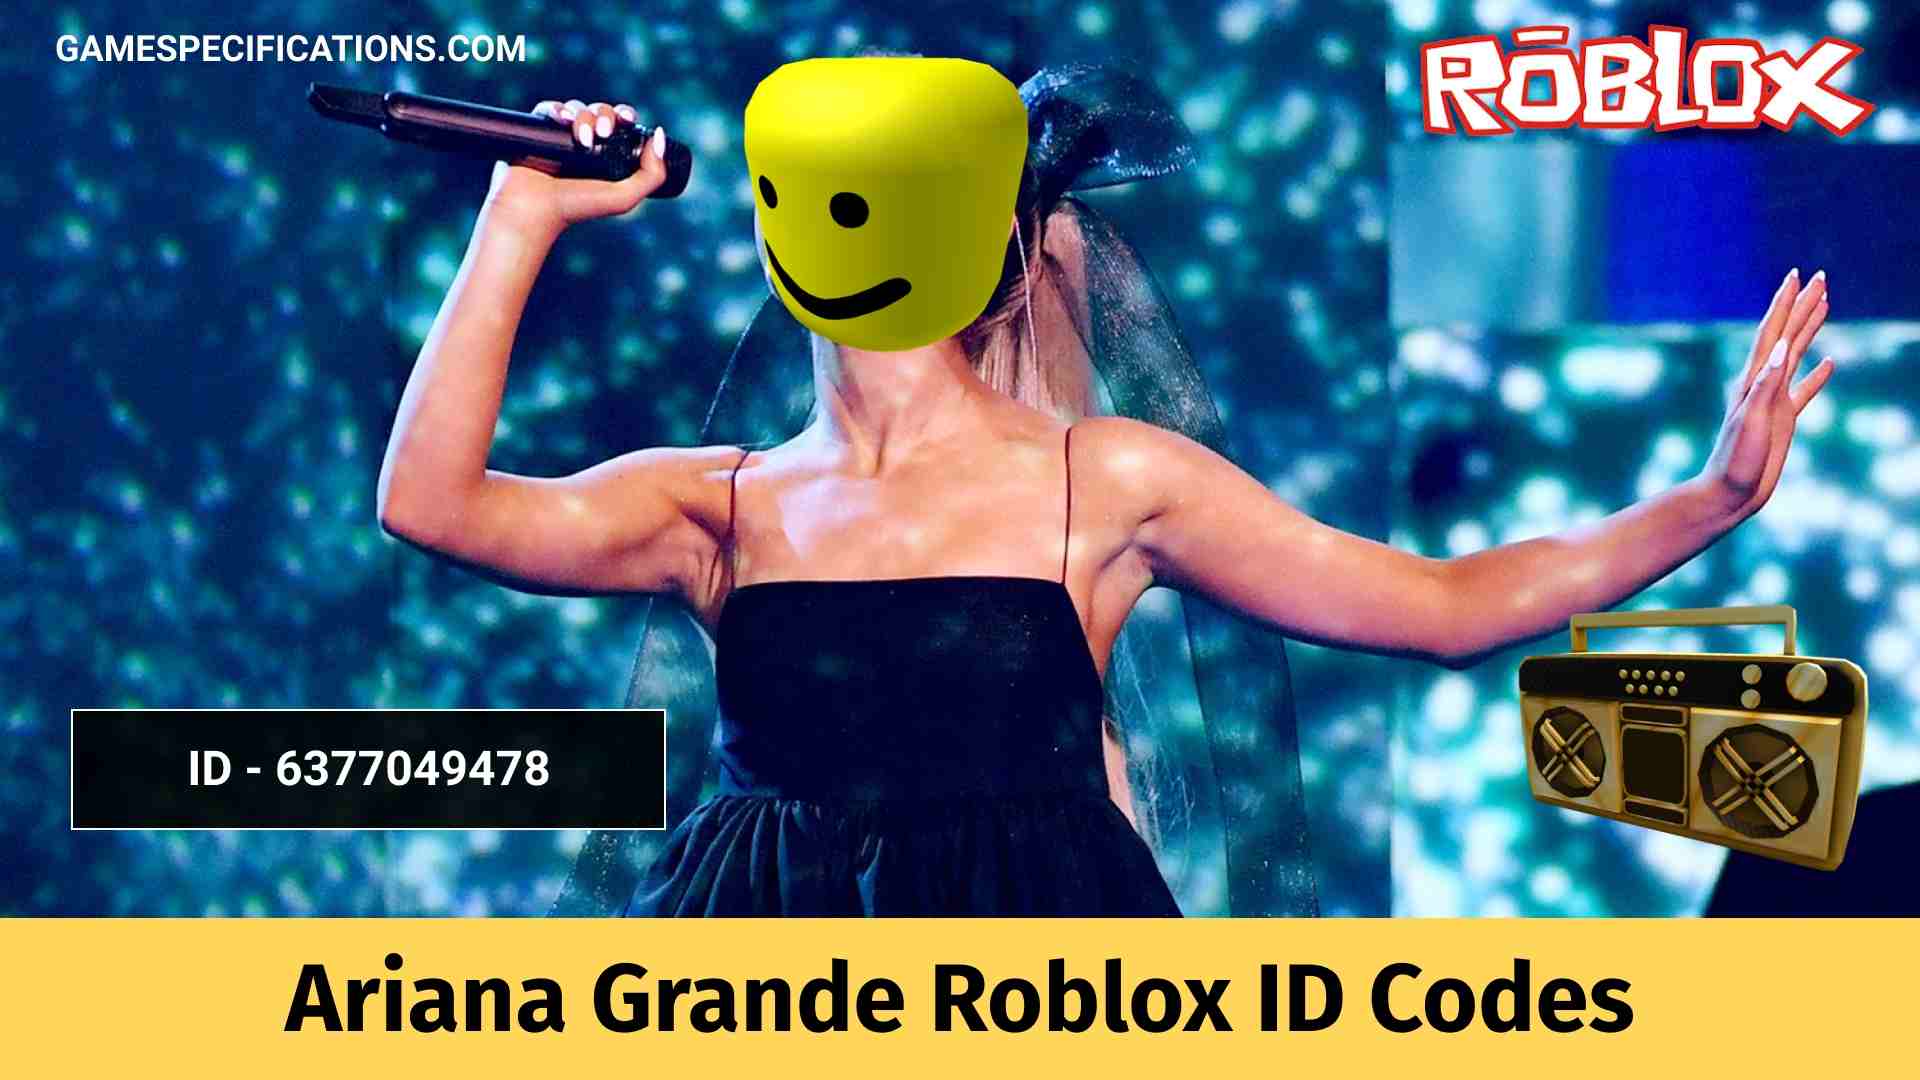 All Famous Ariana Grande Roblox Id Codes 2021 Game Specifications - motive ariana grande roblox id